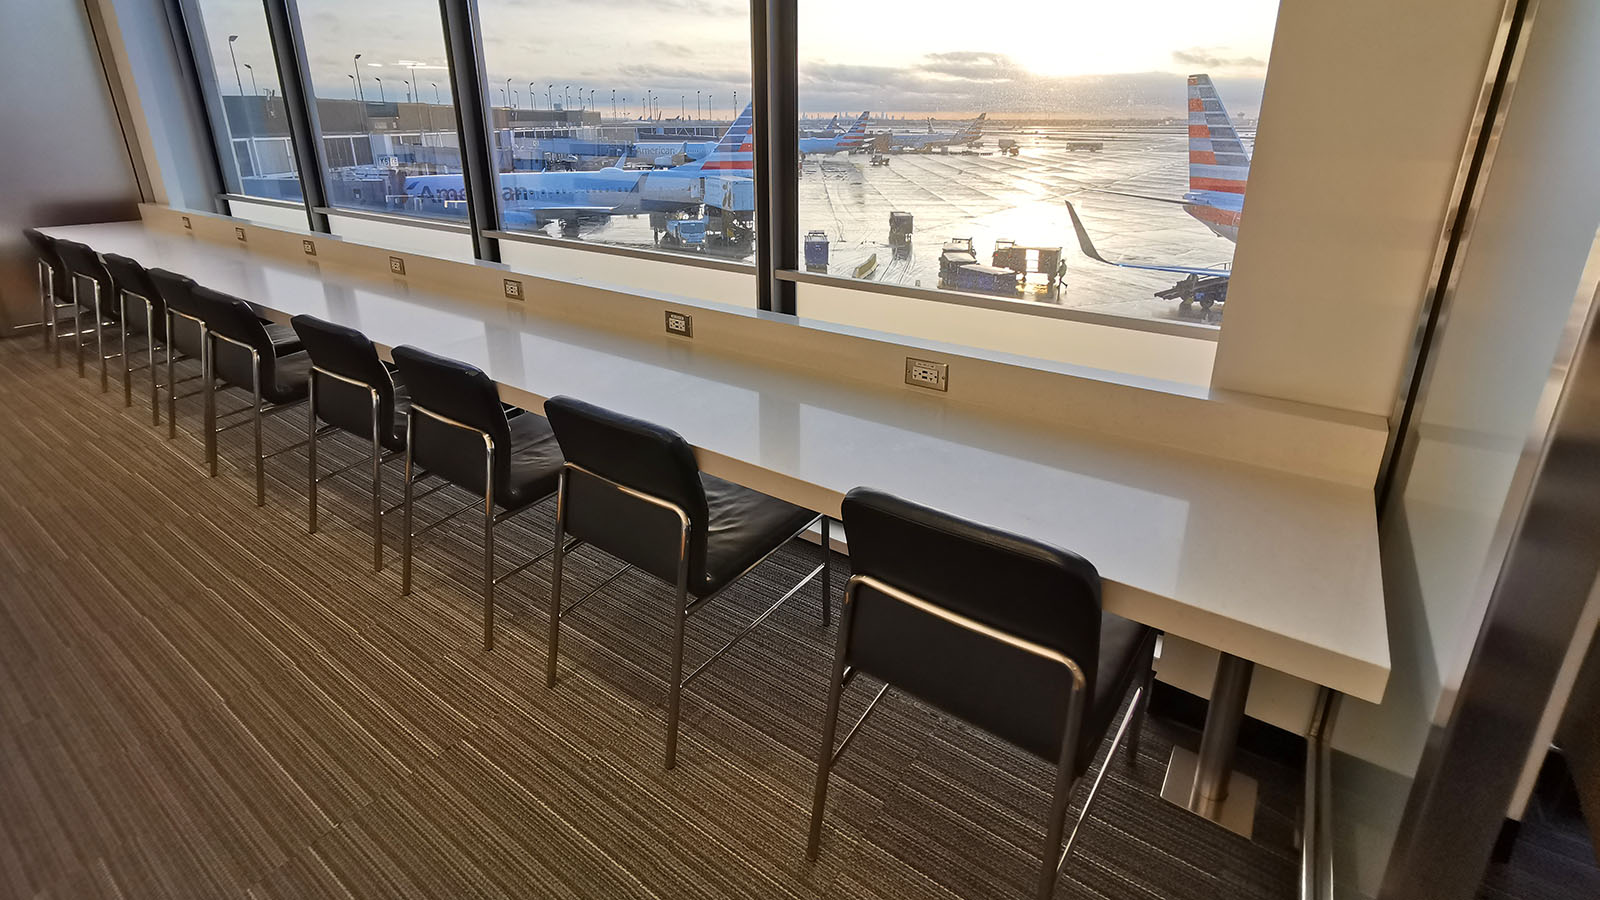 Laptop working bench by the window at AA's Flagship Lounge in Chicago